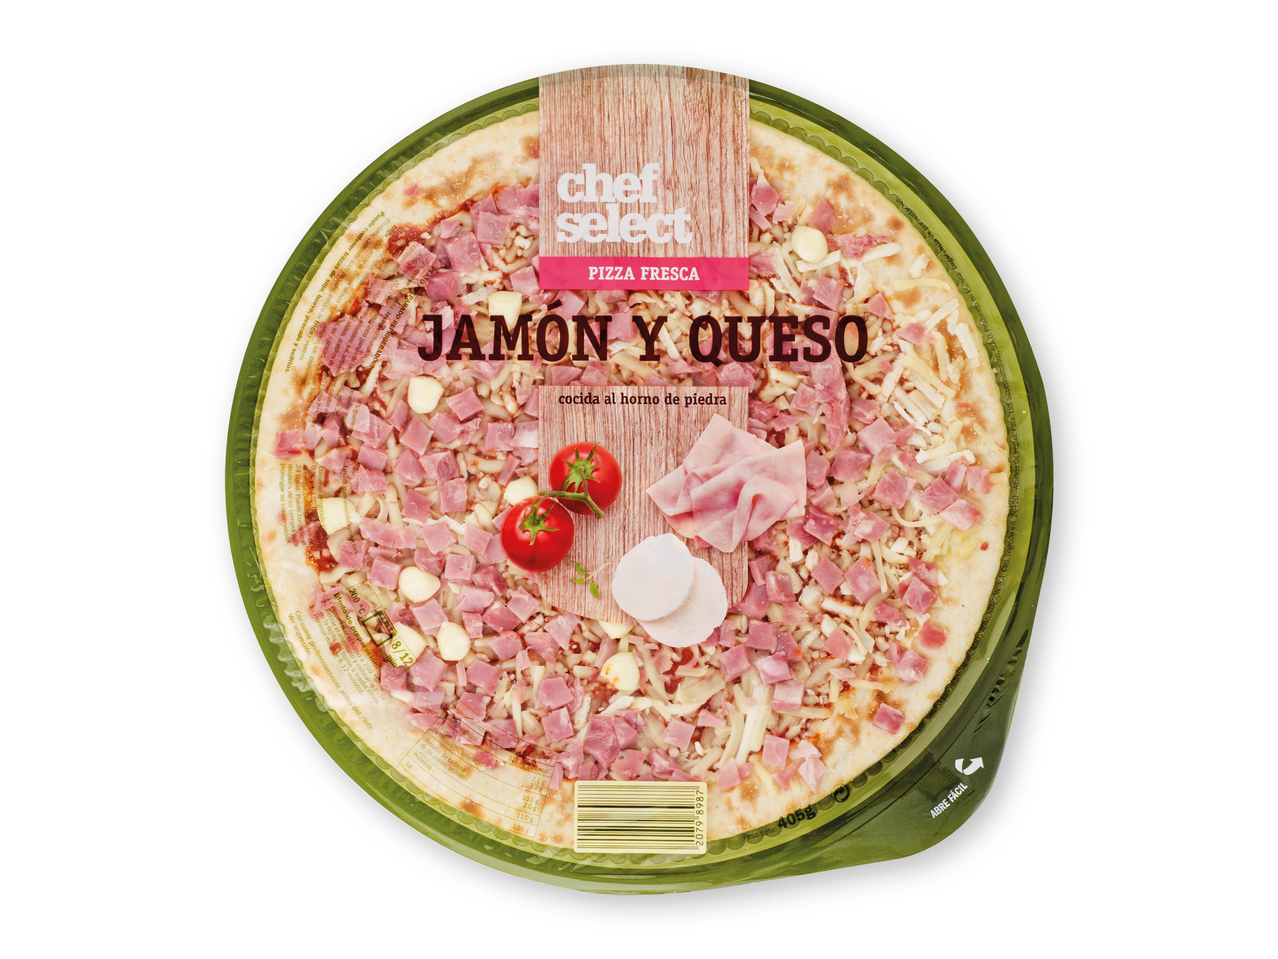 "Chef select" Pizza jamón y queso